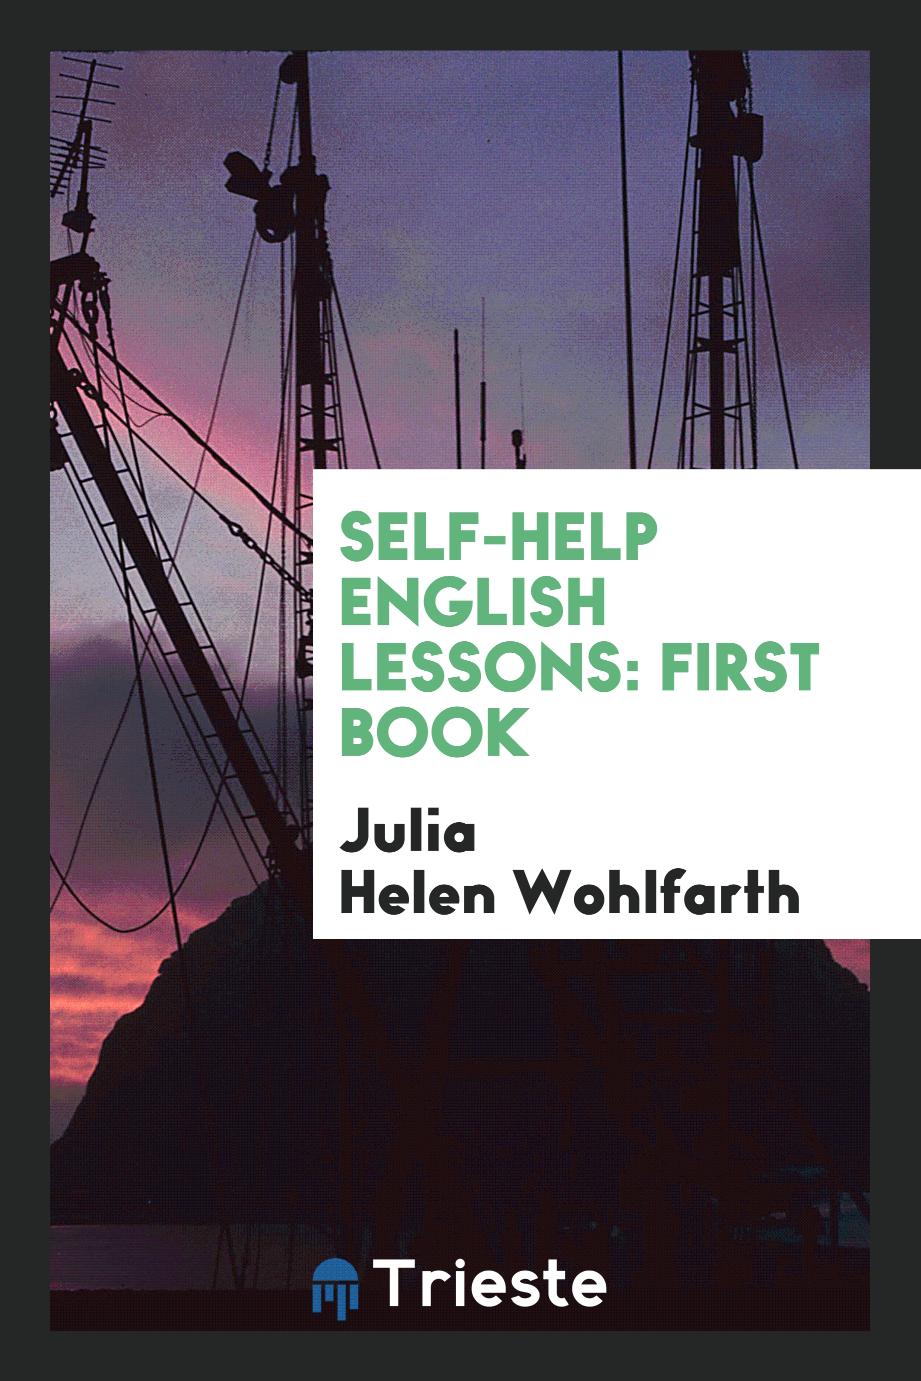 Self-help English lessons: First Book